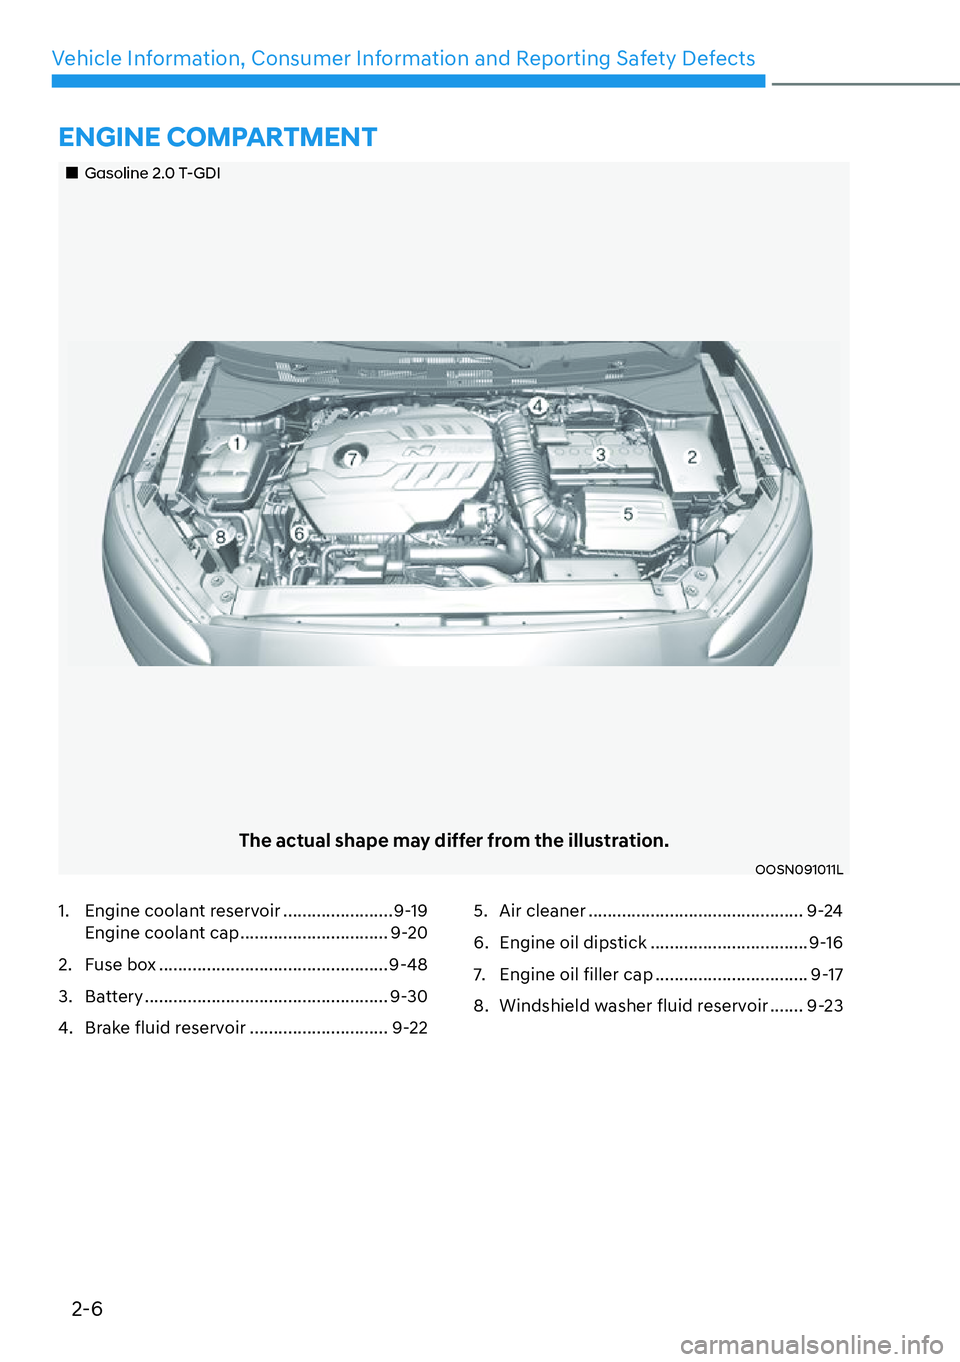 HYUNDAI KONA 2023  Owners Manual 2-6
Vehicle Information, Consumer Information and Reporting Safety Defects
��„Gasoline 2.0 T-GDI
The actual shape may differ from the illustration.
OOSN091011L
1.  Engine coolant reservoir ........